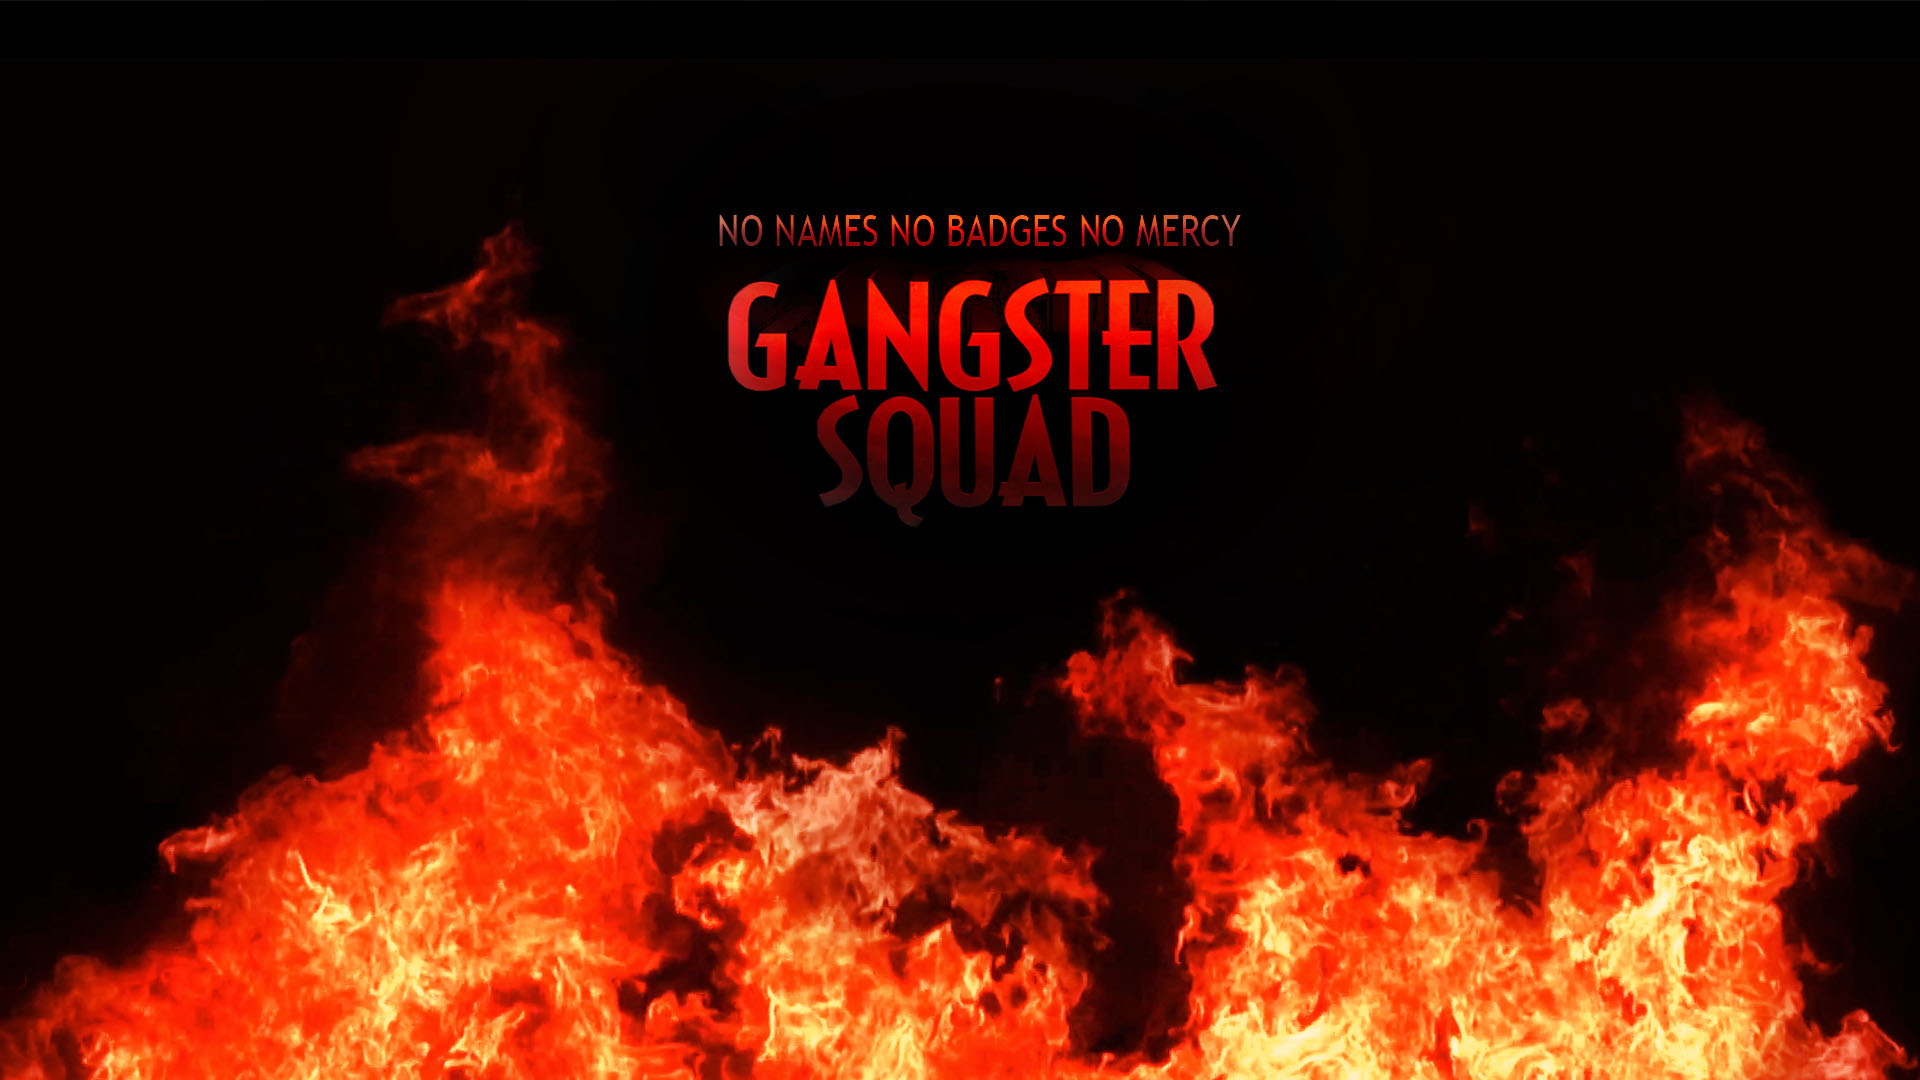 Gangster Squad Wallpaper by PhunLS on DeviantArt